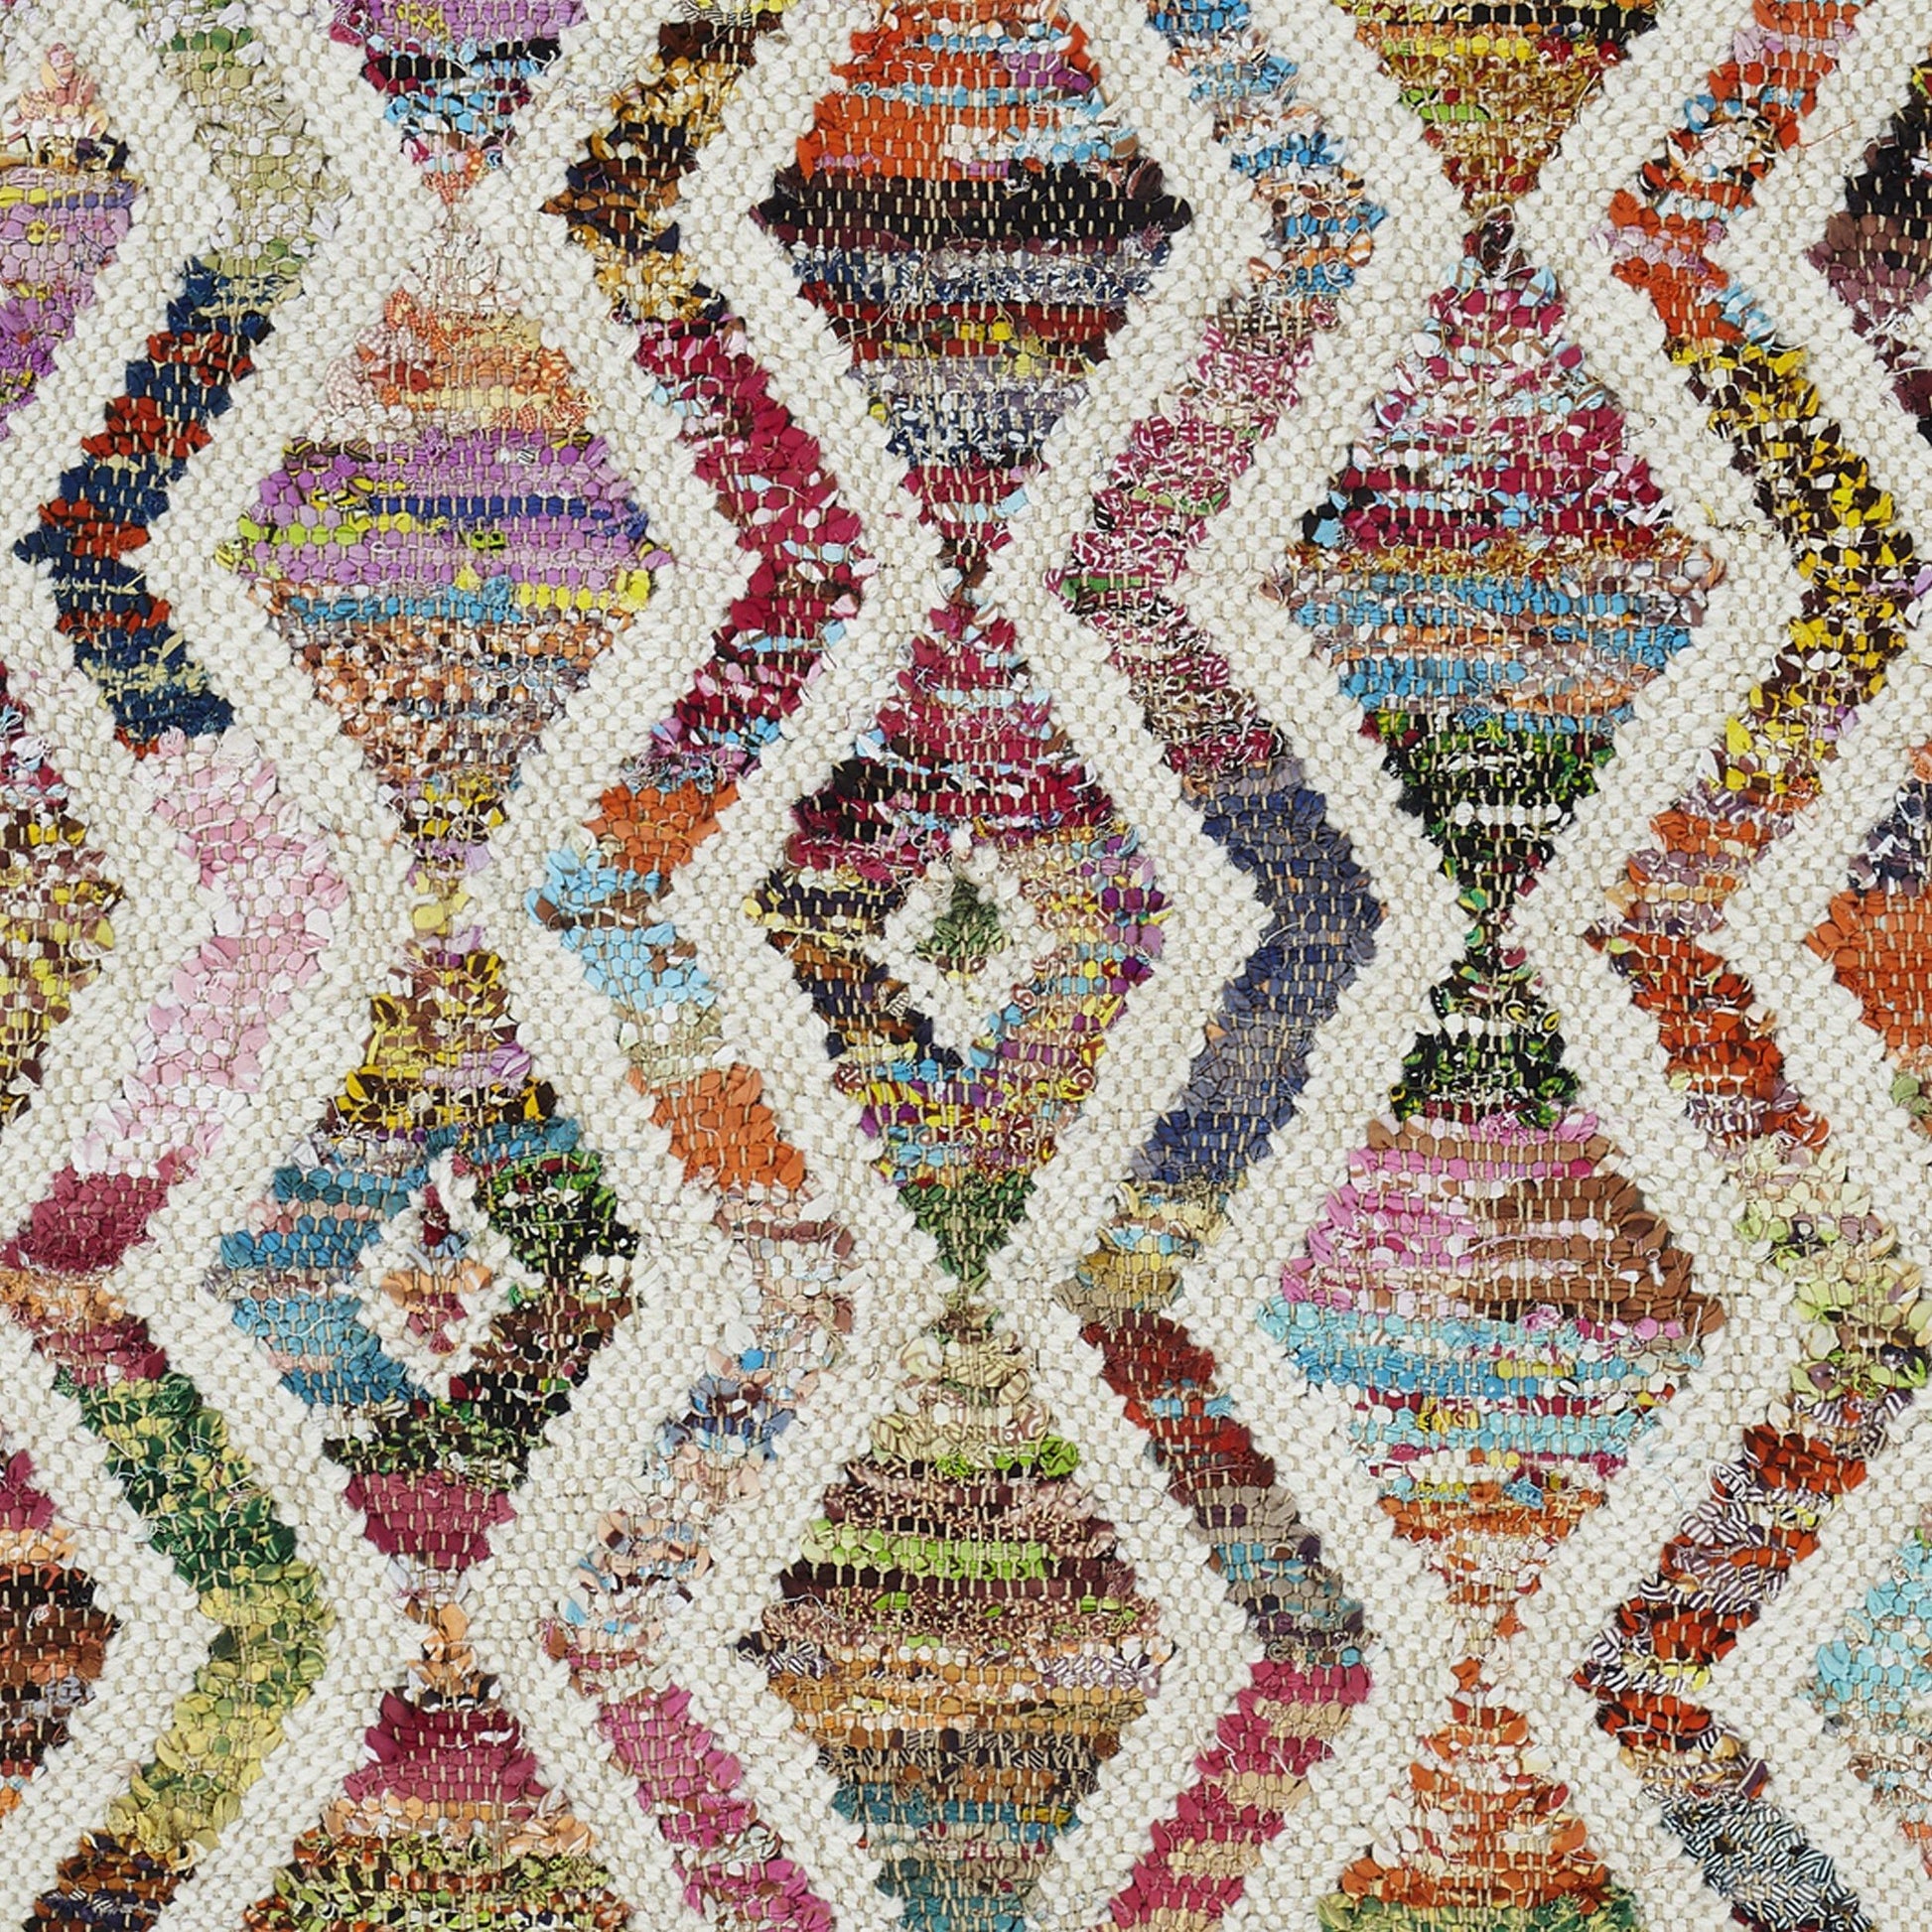 Ziazan Rustic Handcrafted from Recycled Cotton and Wool Rug FredCo